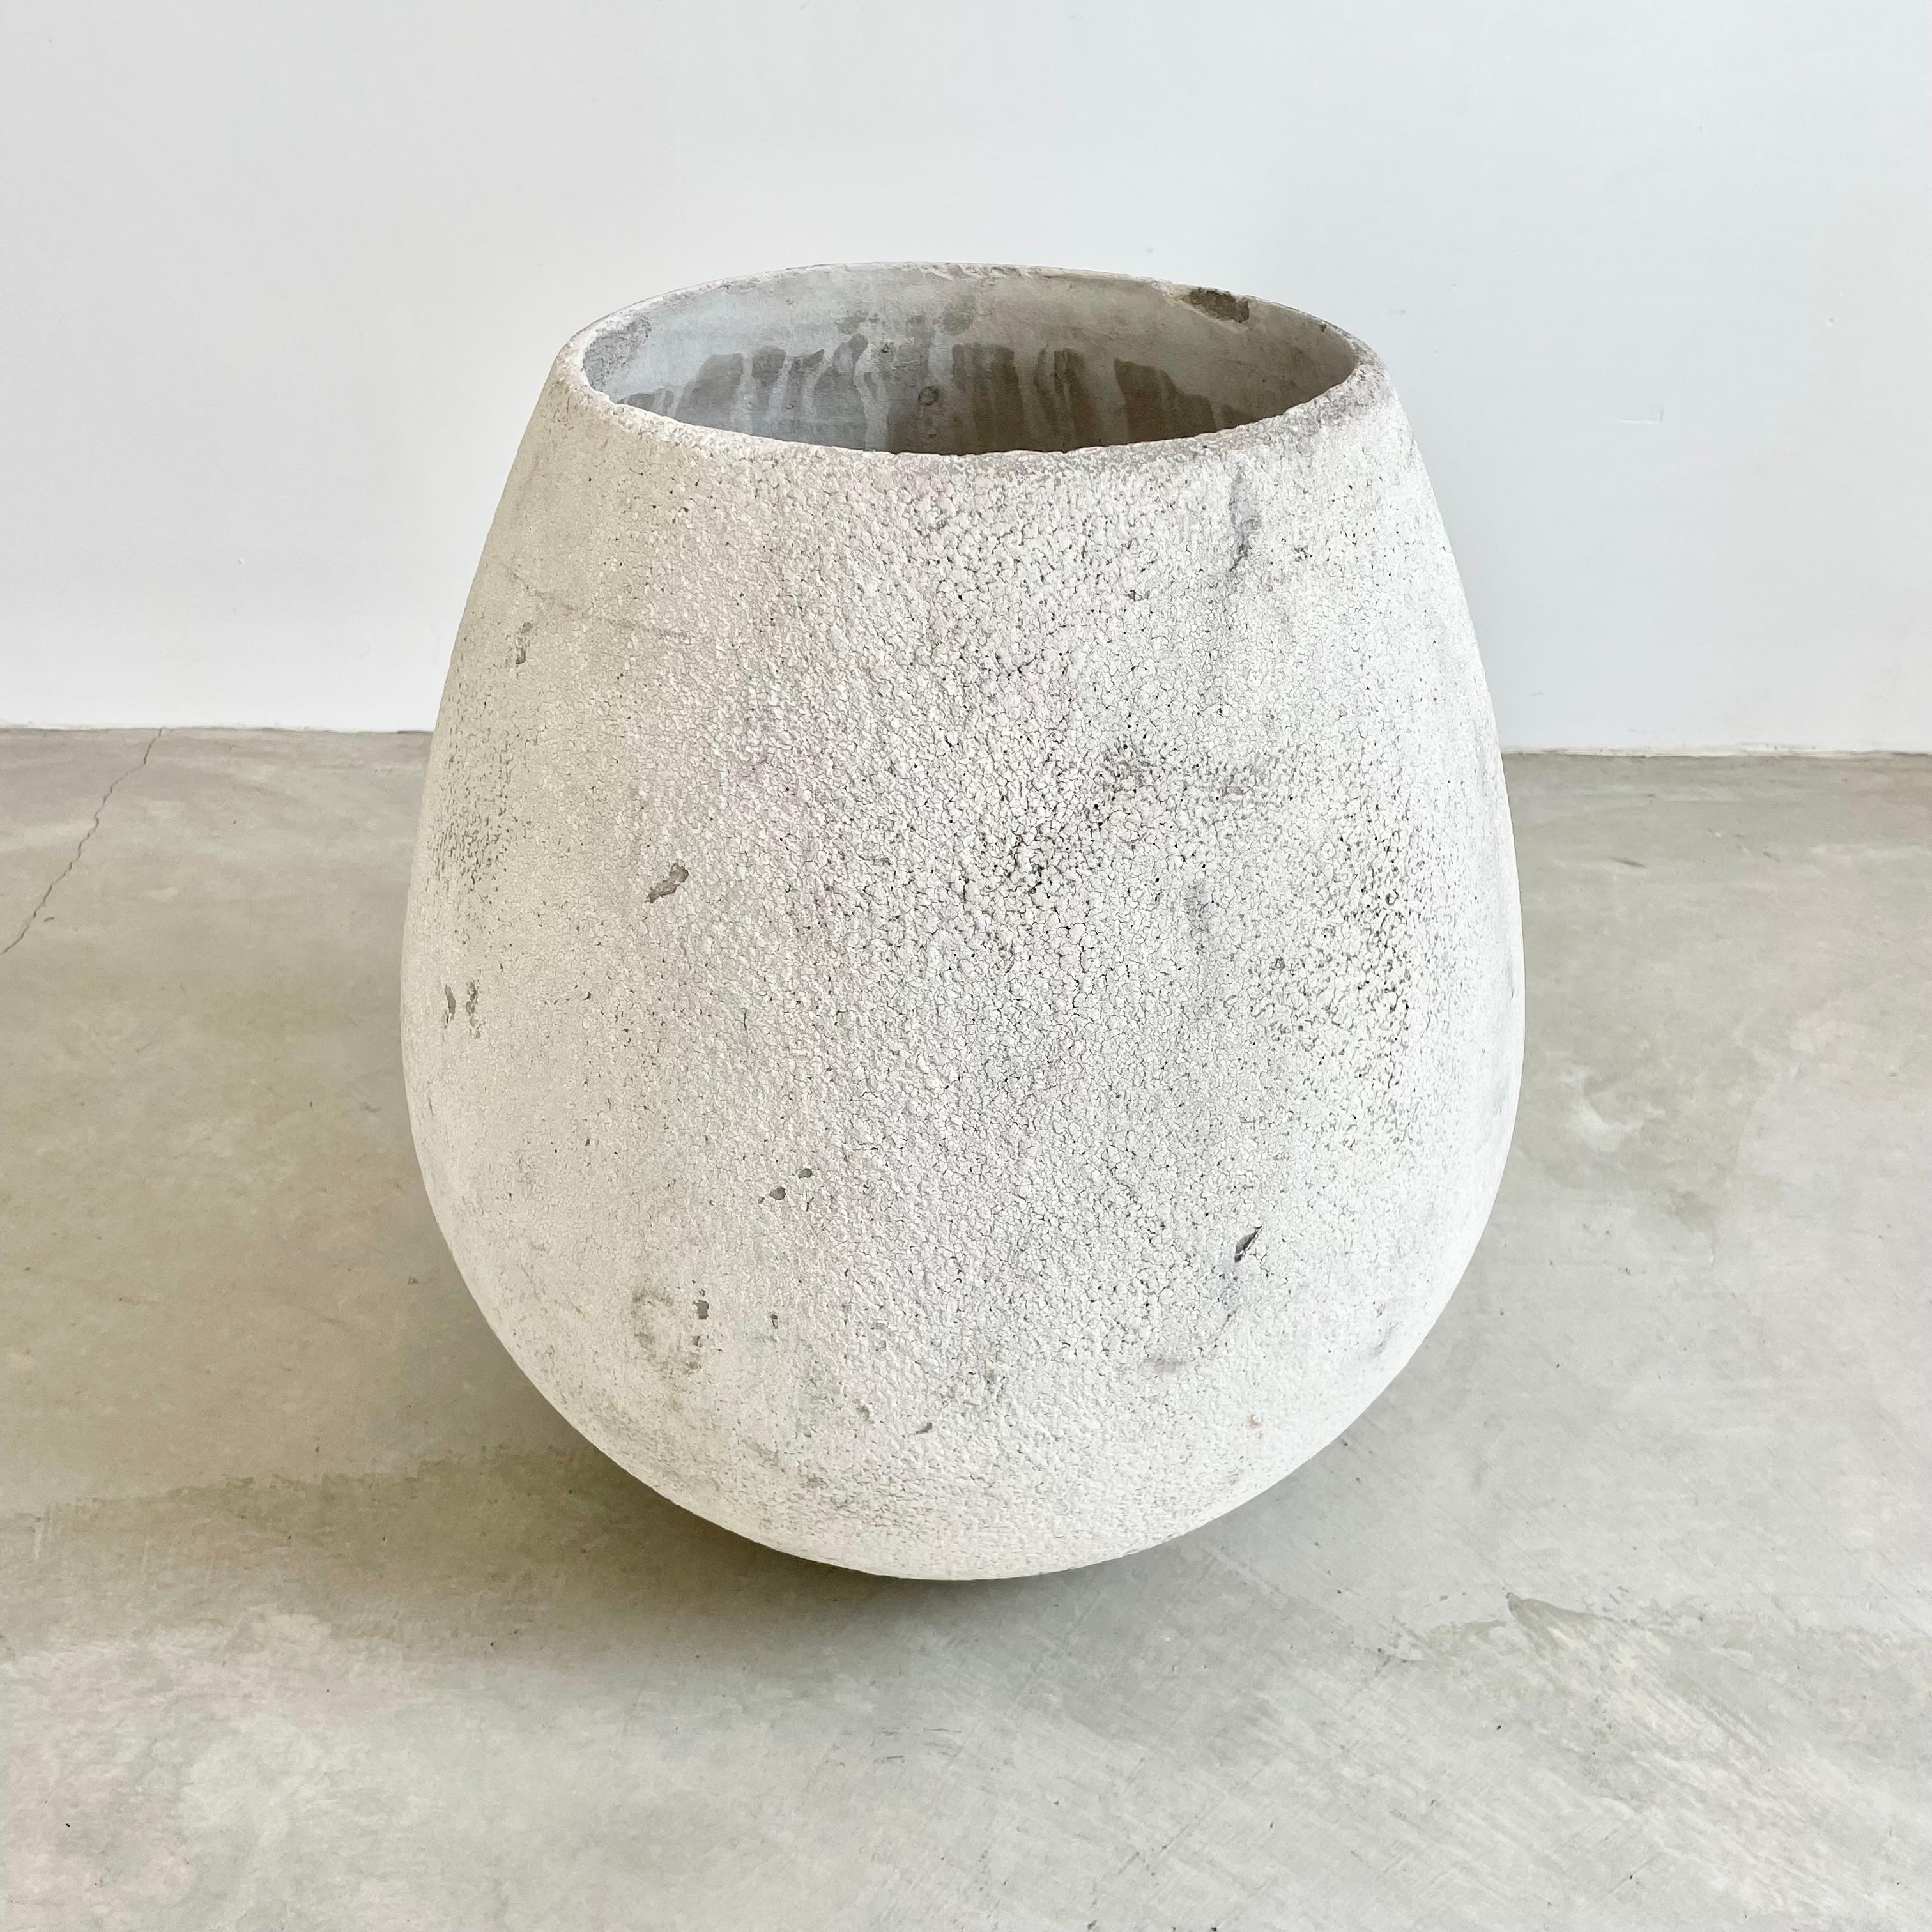 Monumental concrete dinosaur egg shaped planter by Willy Guhl. Rare model. Excellent bone and grey patina. Planter has a rough finish on the exterior giving it great texture and presence. Perfect simple lines on this piece give it a beautiful